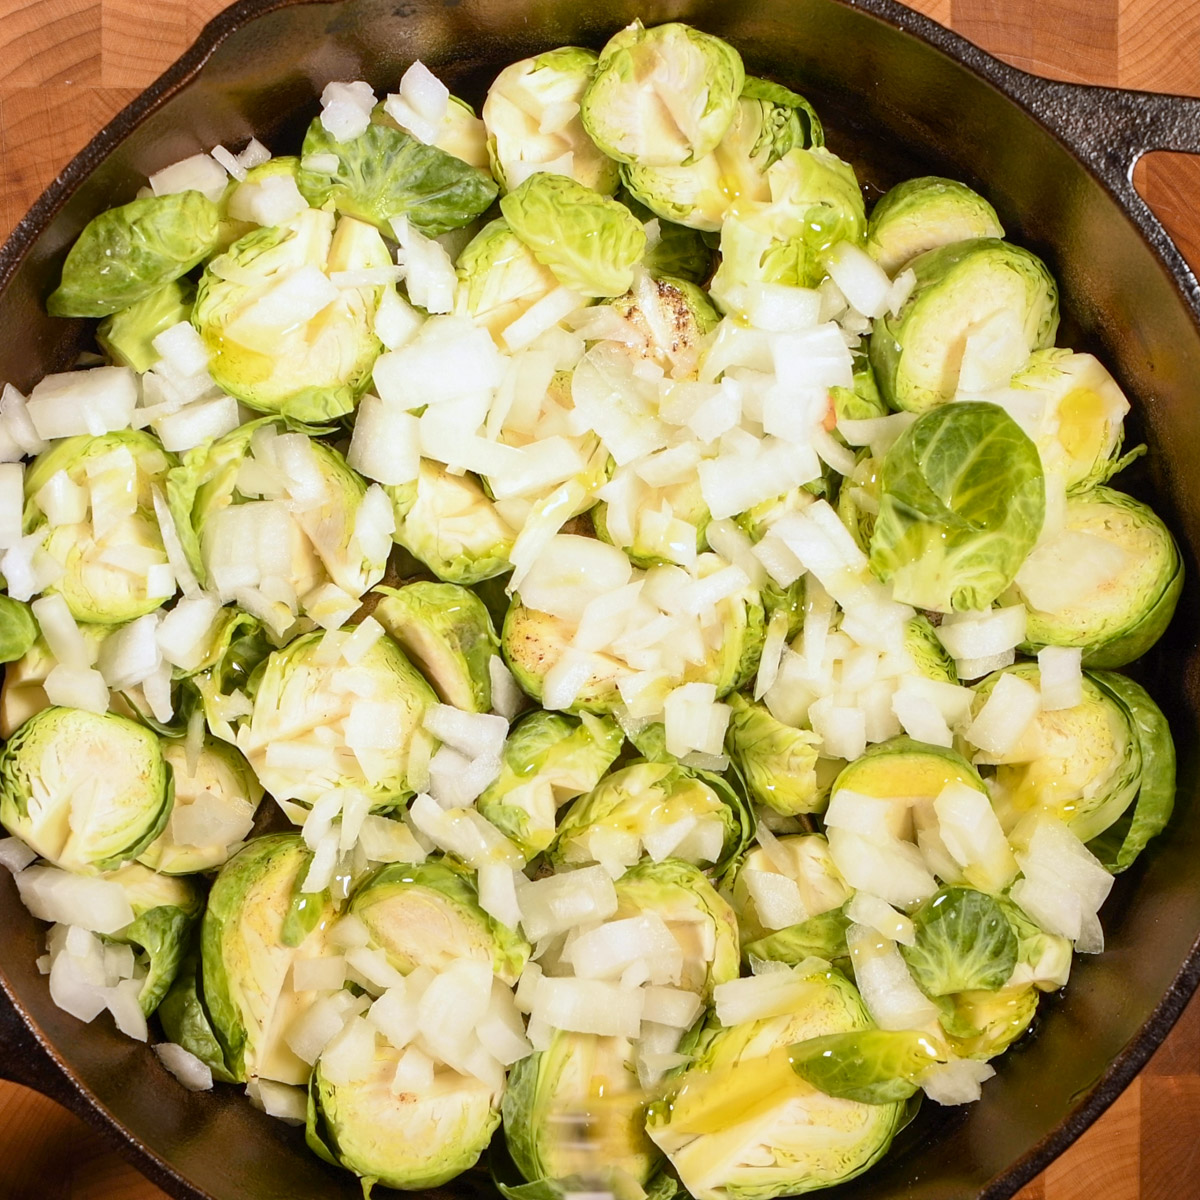 Trimmed Brussels sprouts and onion in a cast iron skillet.